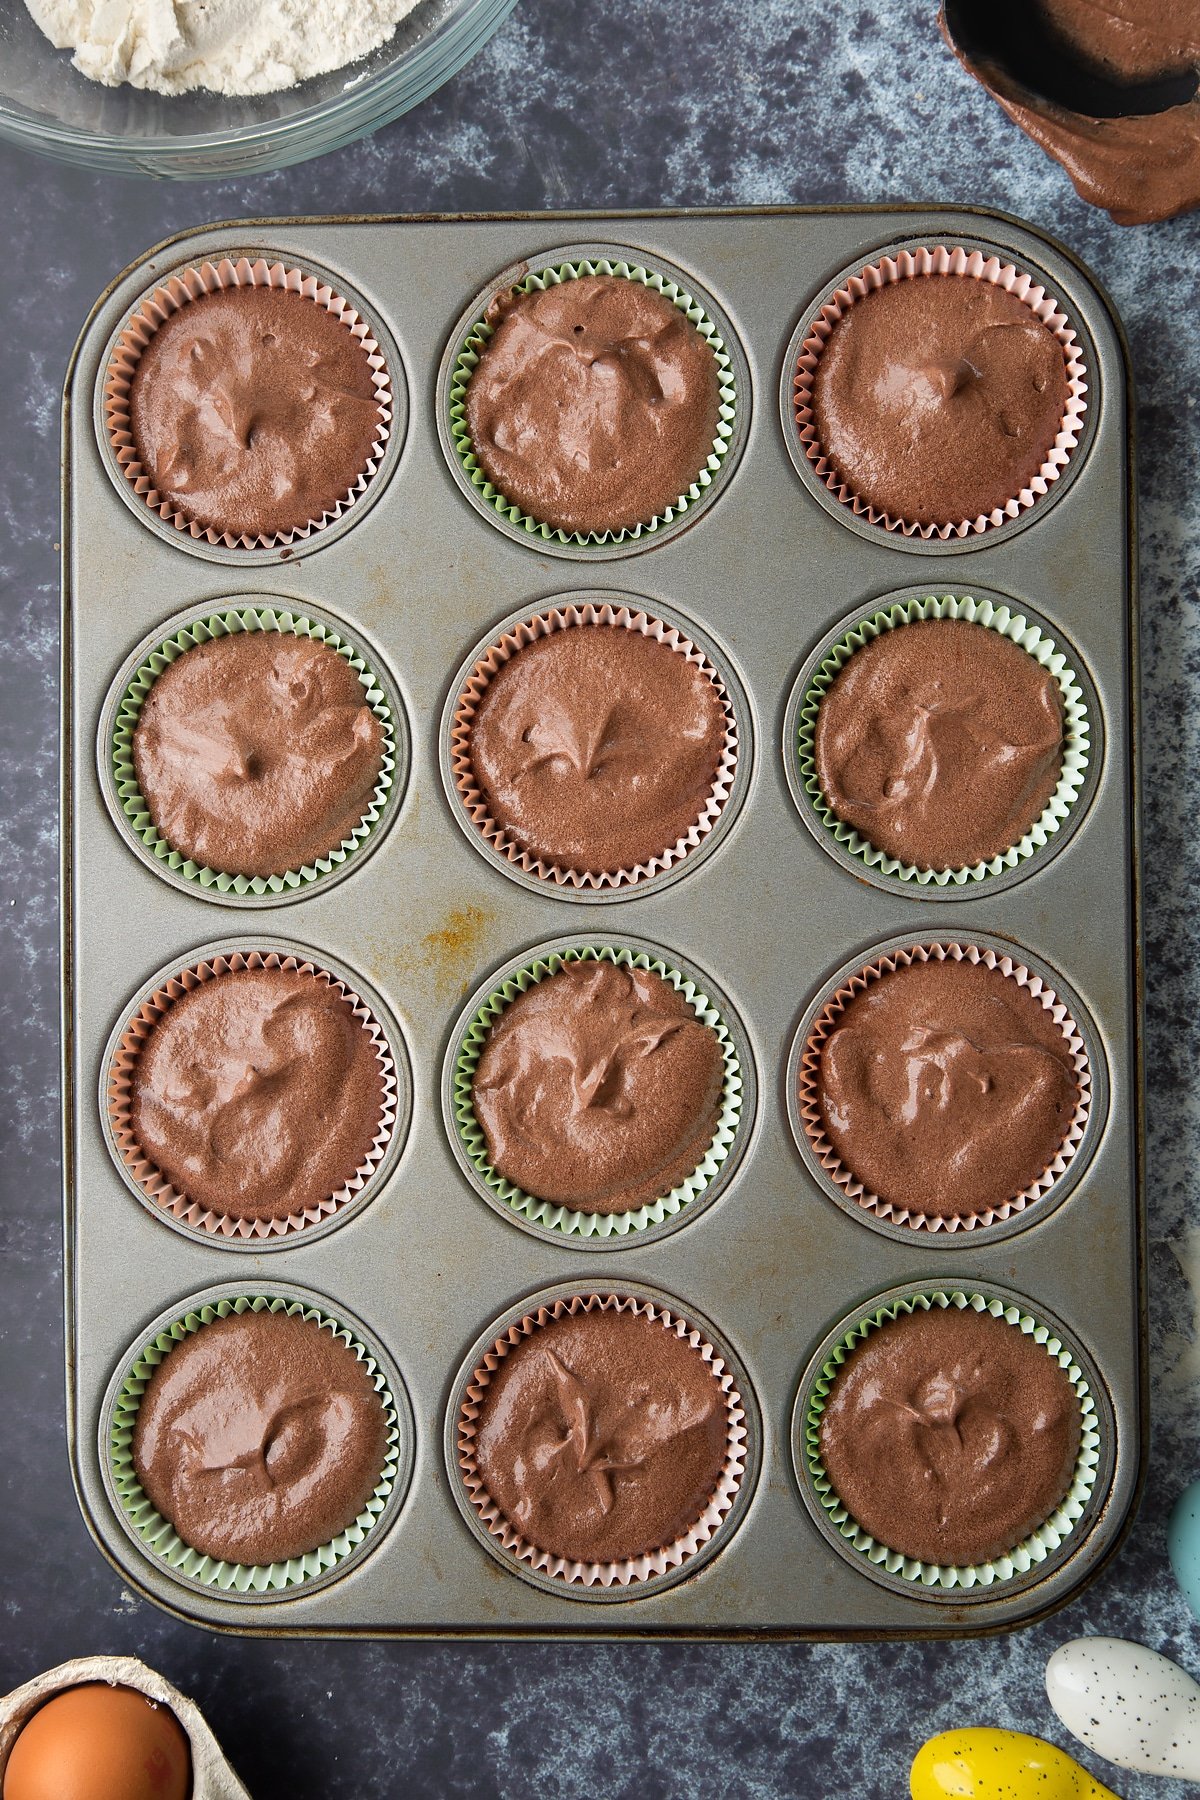 Chocolate cupcake batter in a 12 hole muffin tray. Ingredients to make spider web cupcakes surround the tray.